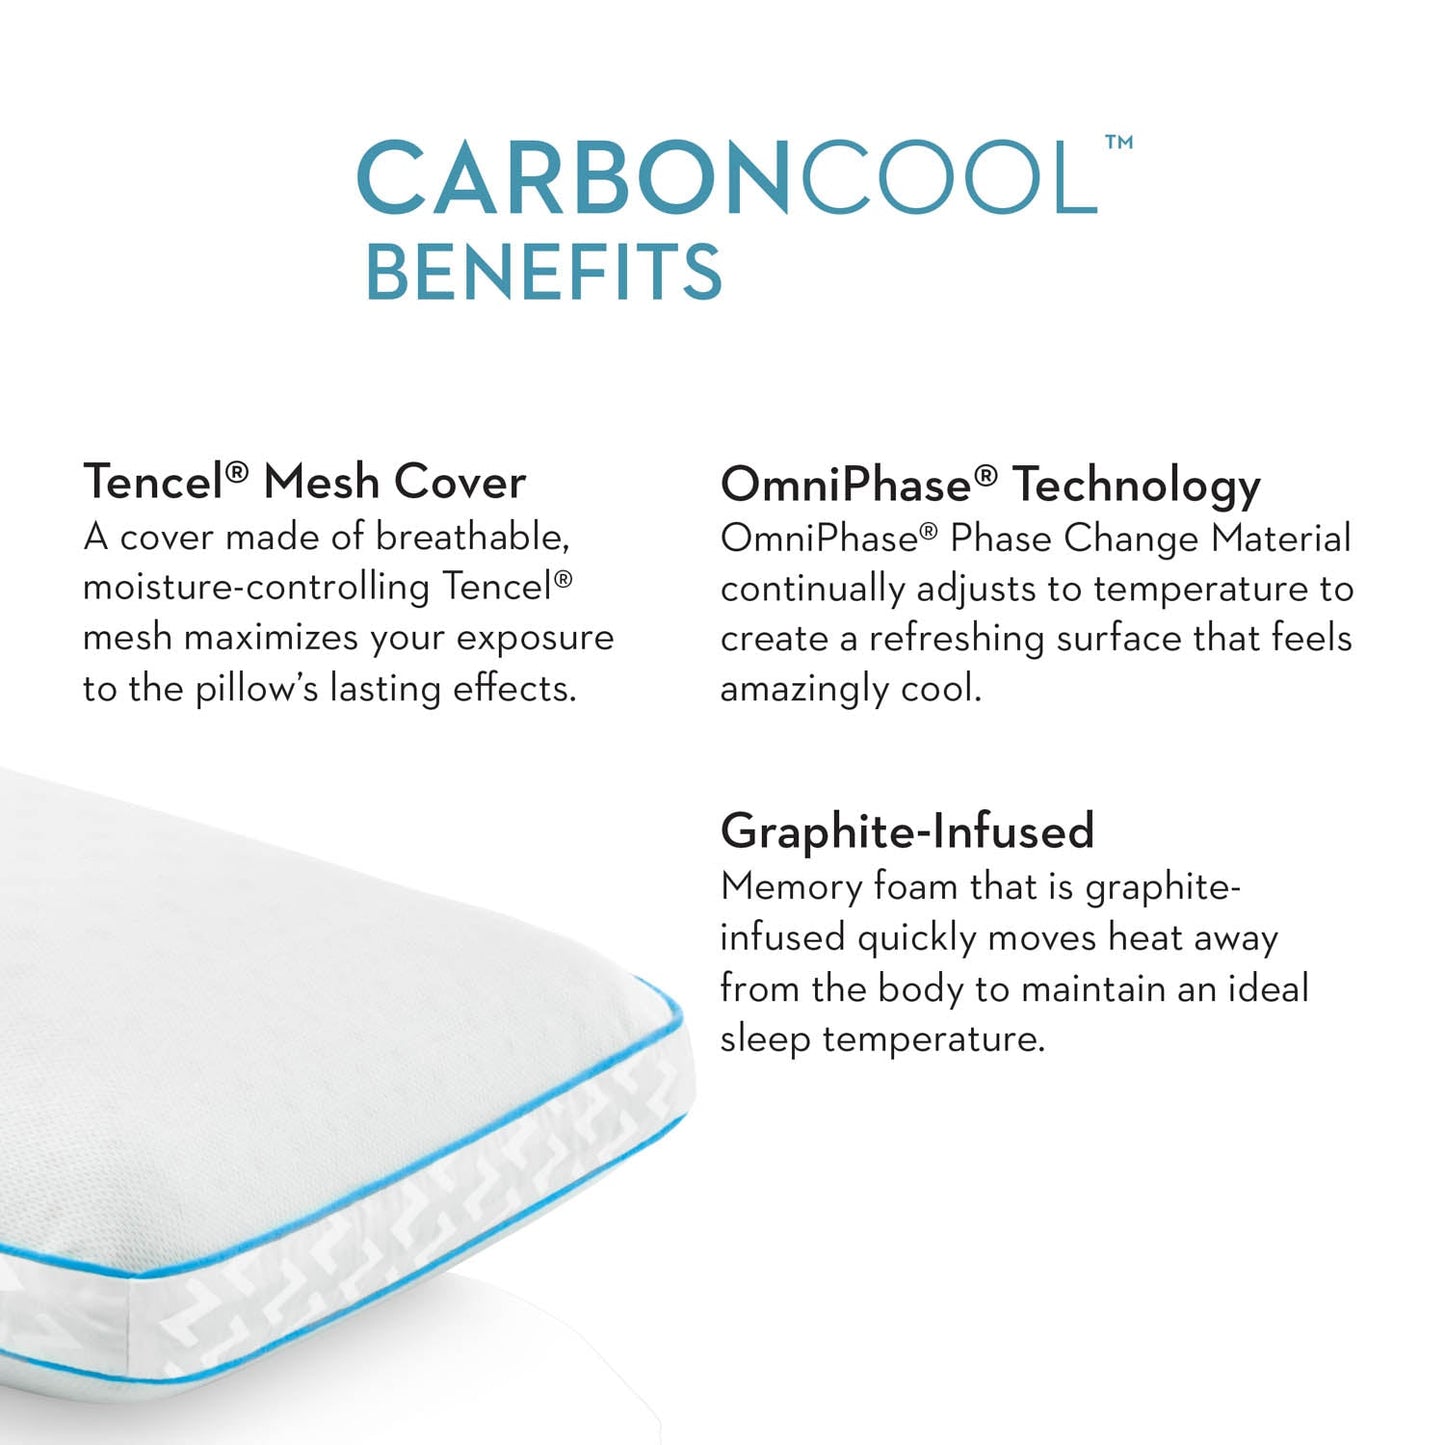 Travel CarbonCool® + OmniPhase®